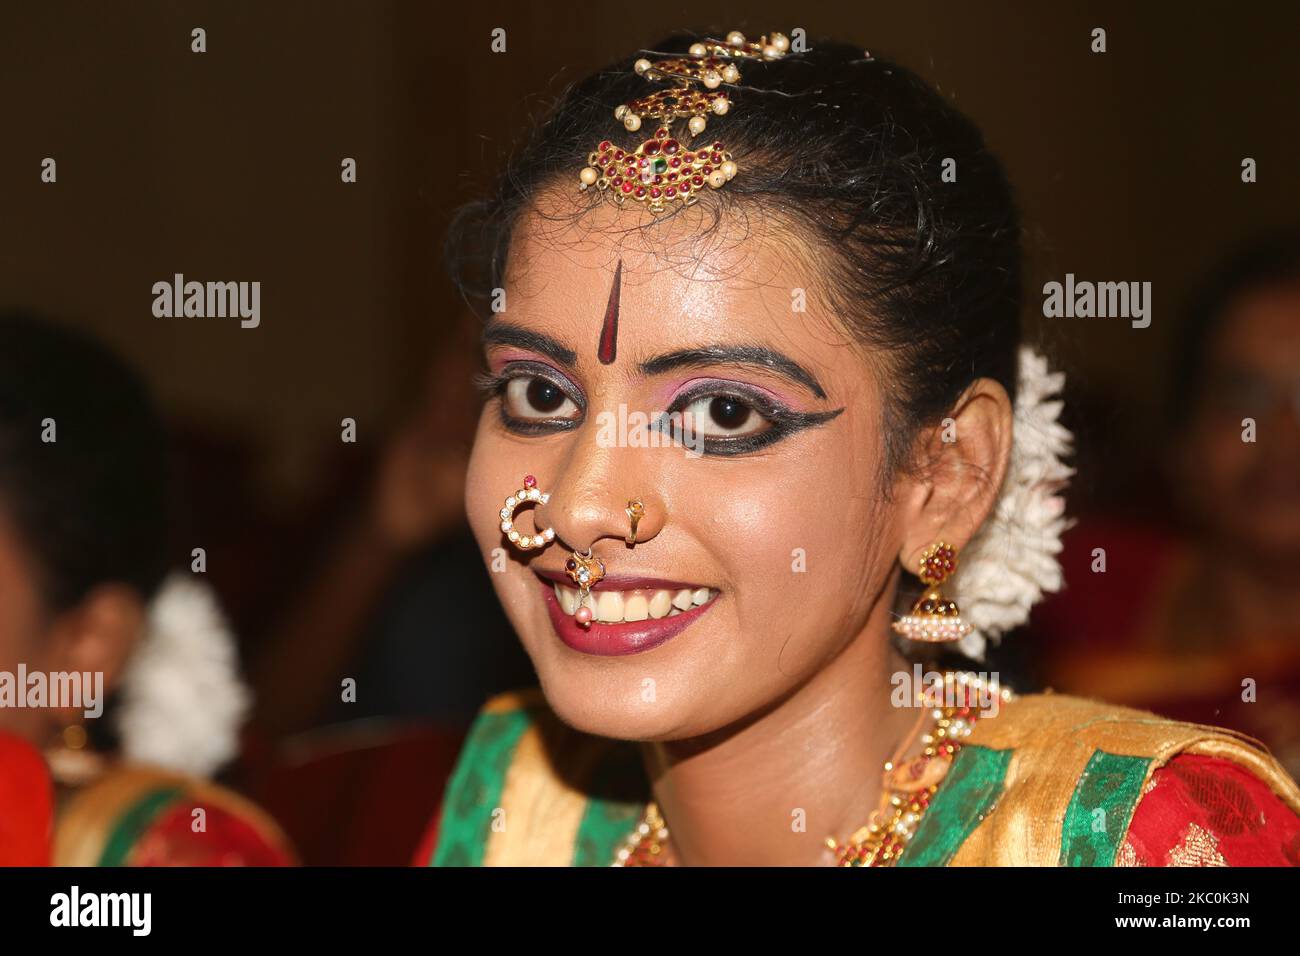 Tamil girl dressed in traditional attire waits to perform a Bharathnatyam dance during a special cultural program featuring Tamil children who were orphaned during the civil war in Jaffna, Sri Lanka, on August 12, 2017. This is just one of the many reminders of the deep scars caused during the 26-year long civil war between the Sri Lankan Army and the LTTE (Liberation Tigers of Tamil Eelam). The United Nations estimates about 40,000 people were killed during the war. (Photo by Creative Touch Imaging Ltd./NurPhoto) Stock Photo